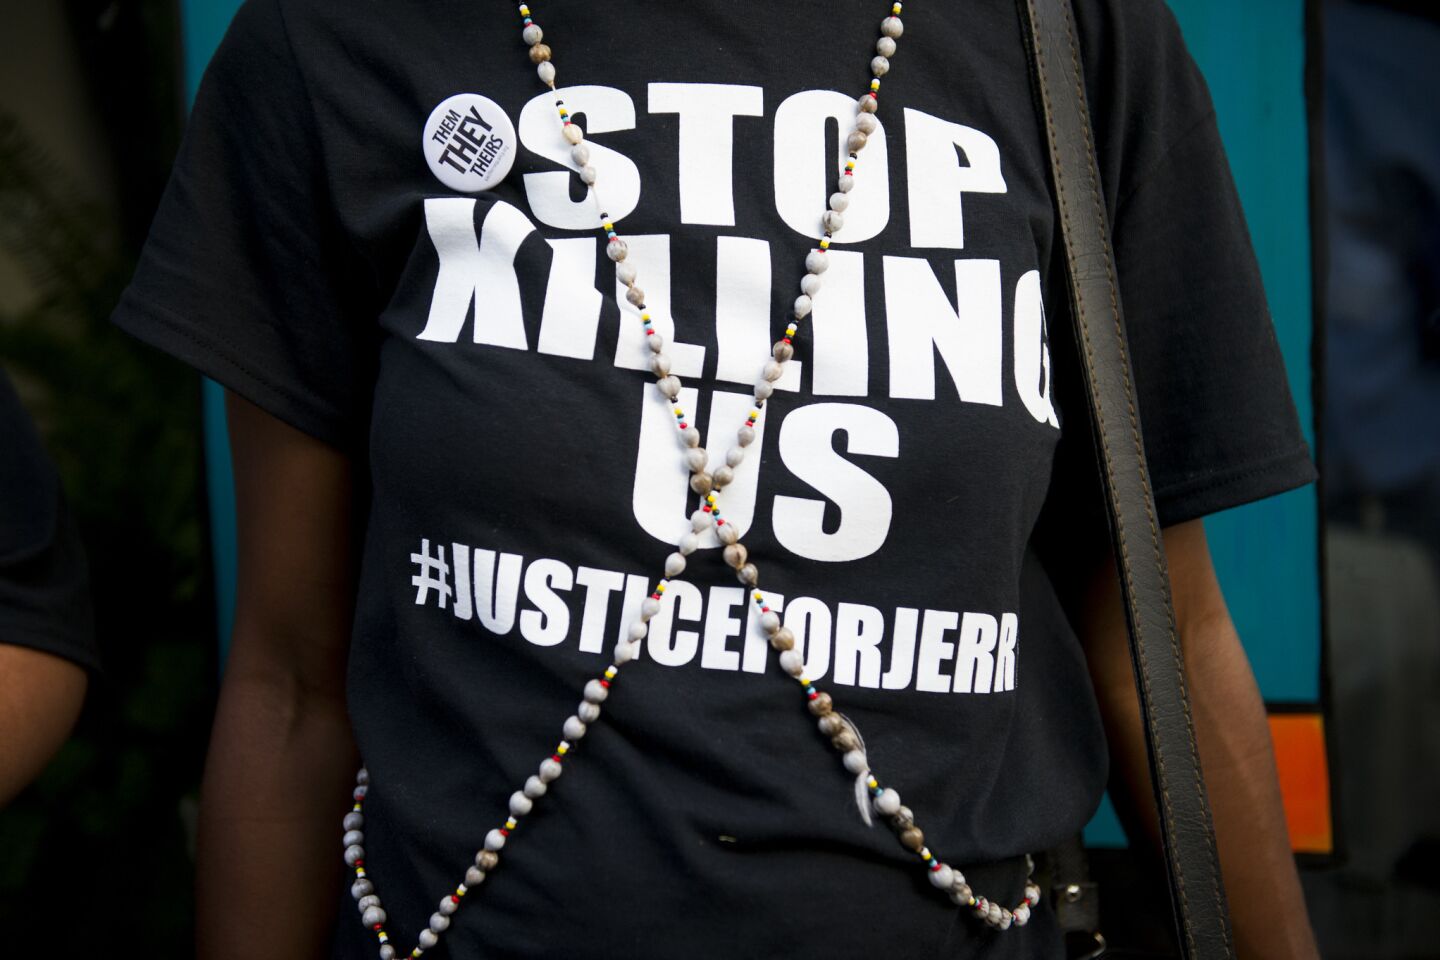 Family members and concerned citizens wear T-shirts in memory of Jai "Jerry" Williams, who was shot and killed by police in Asheville, N.C., on July 2, 2016.